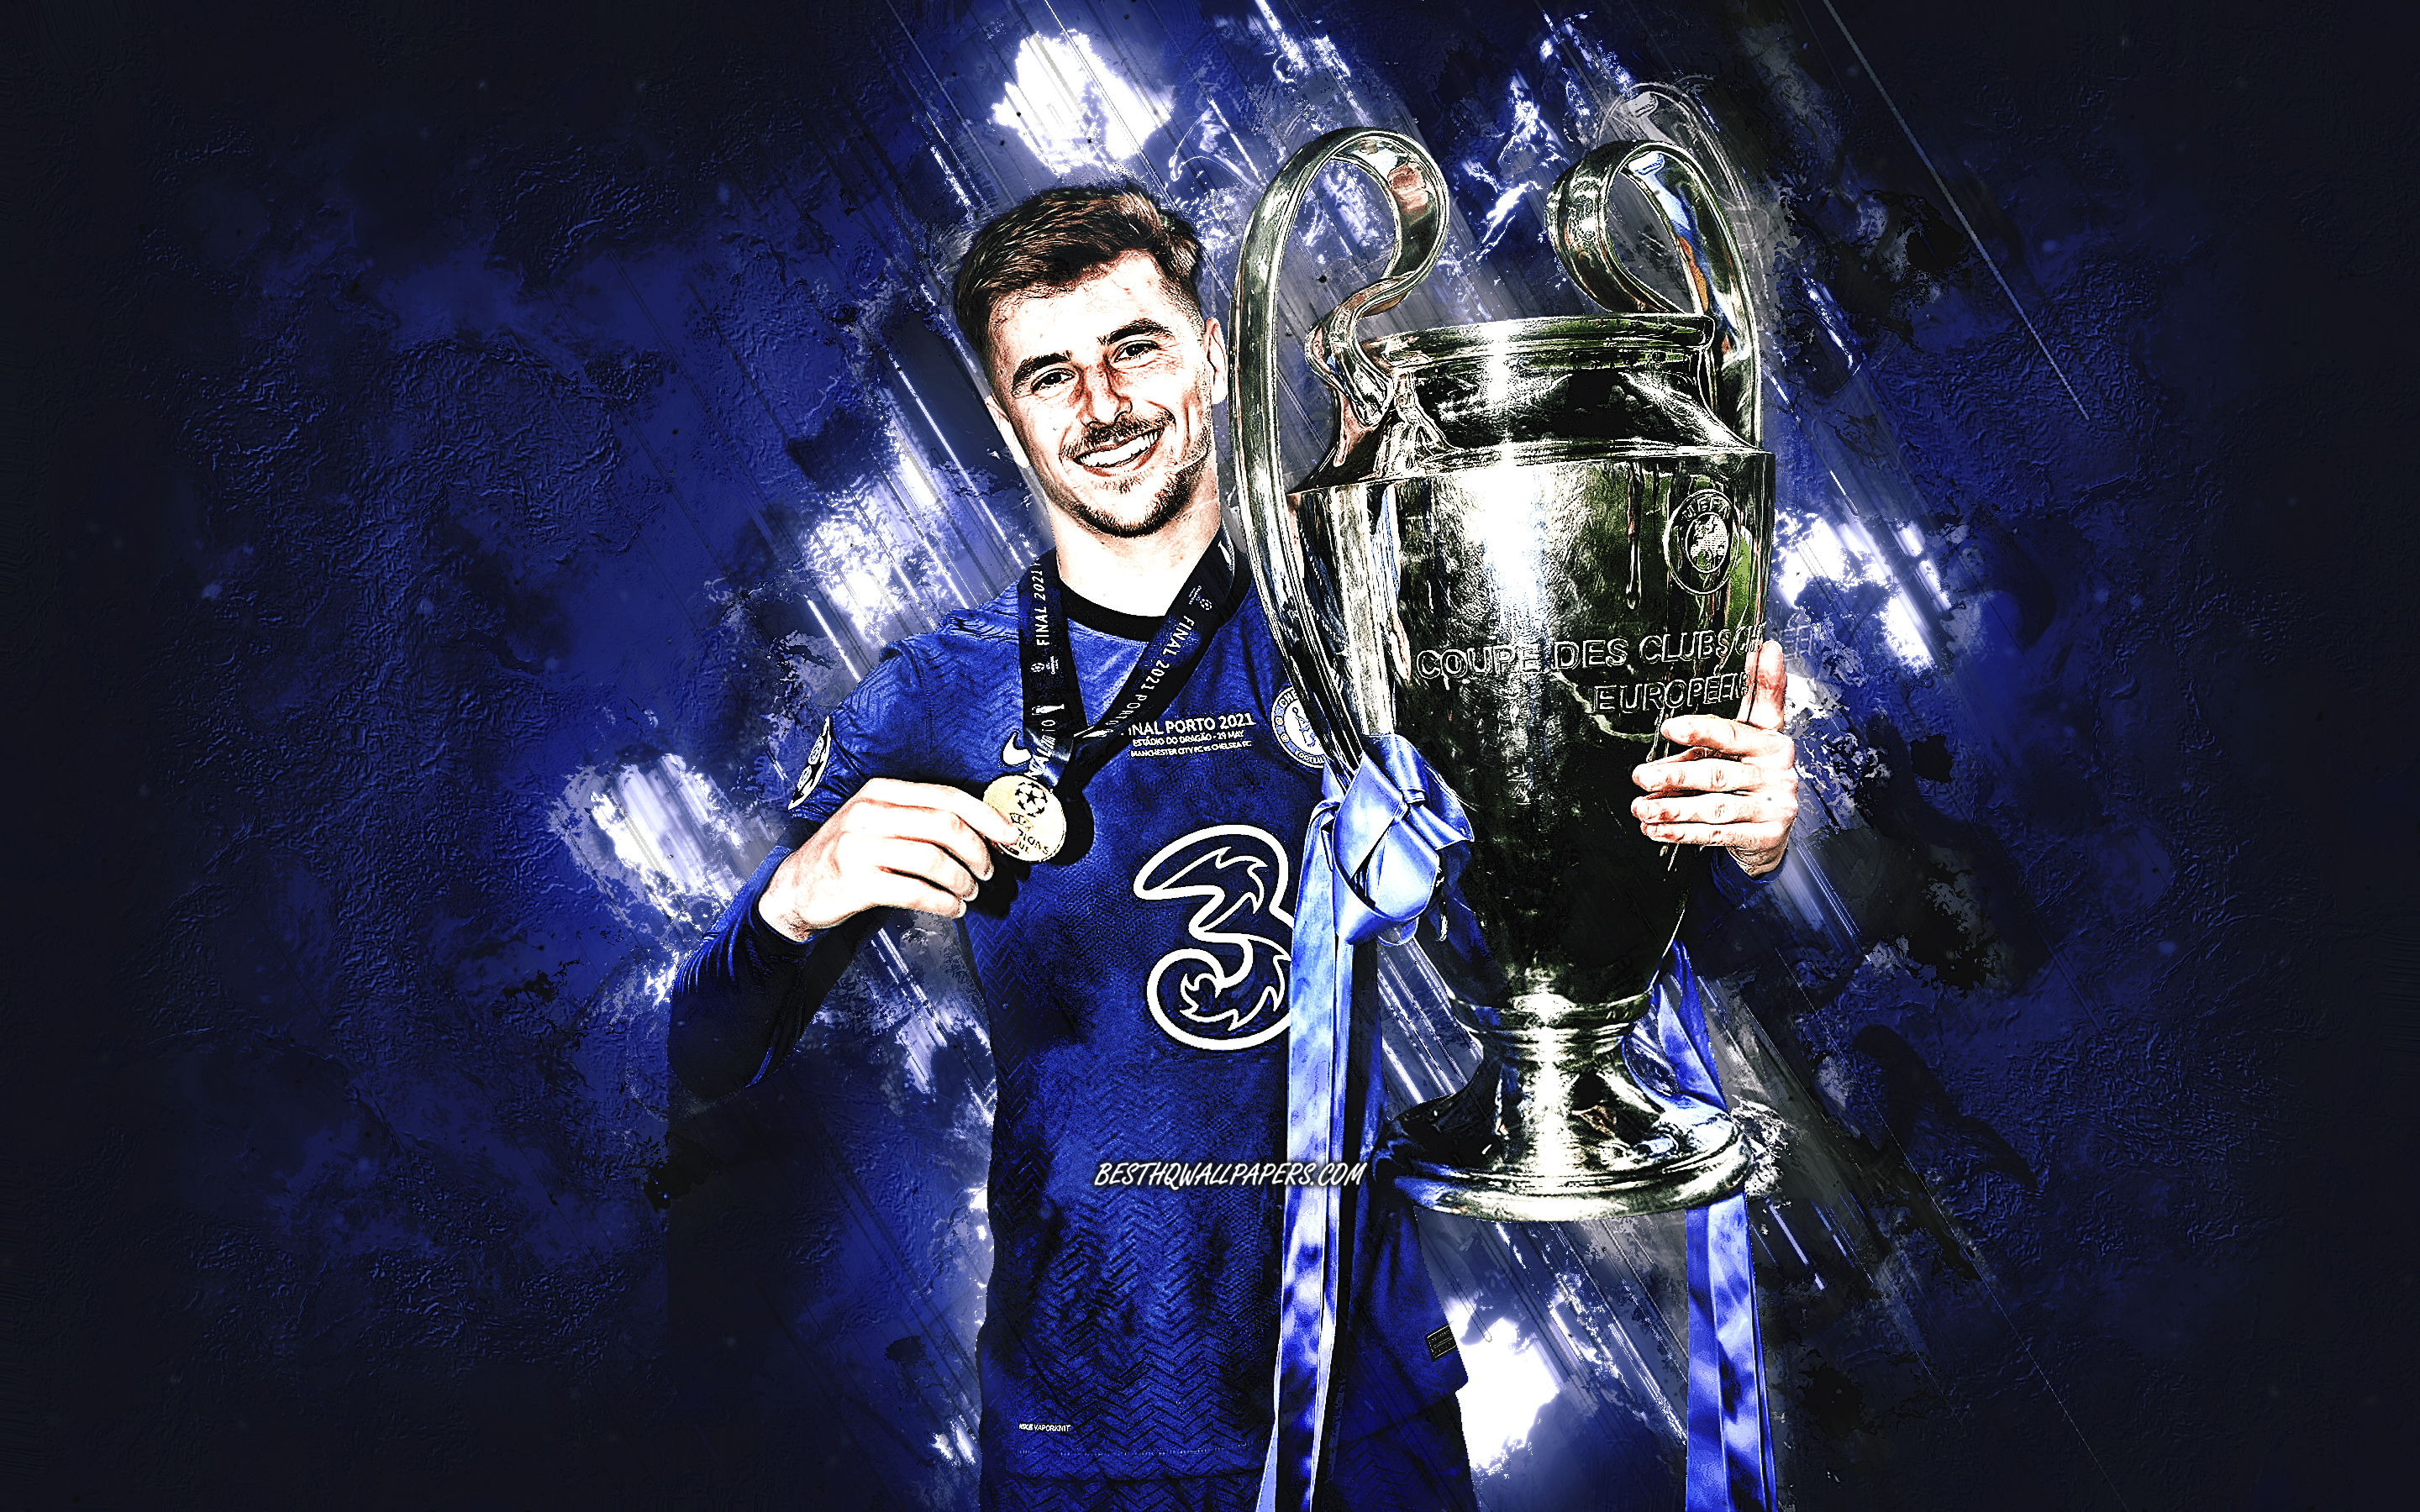 Download wallpaper Mason Mount, Chelsea FC, Champions League cup, English footballer, blue stone background, soccer, grunge art for desktop with resolution 2880x1800. High Quality HD picture wallpaper